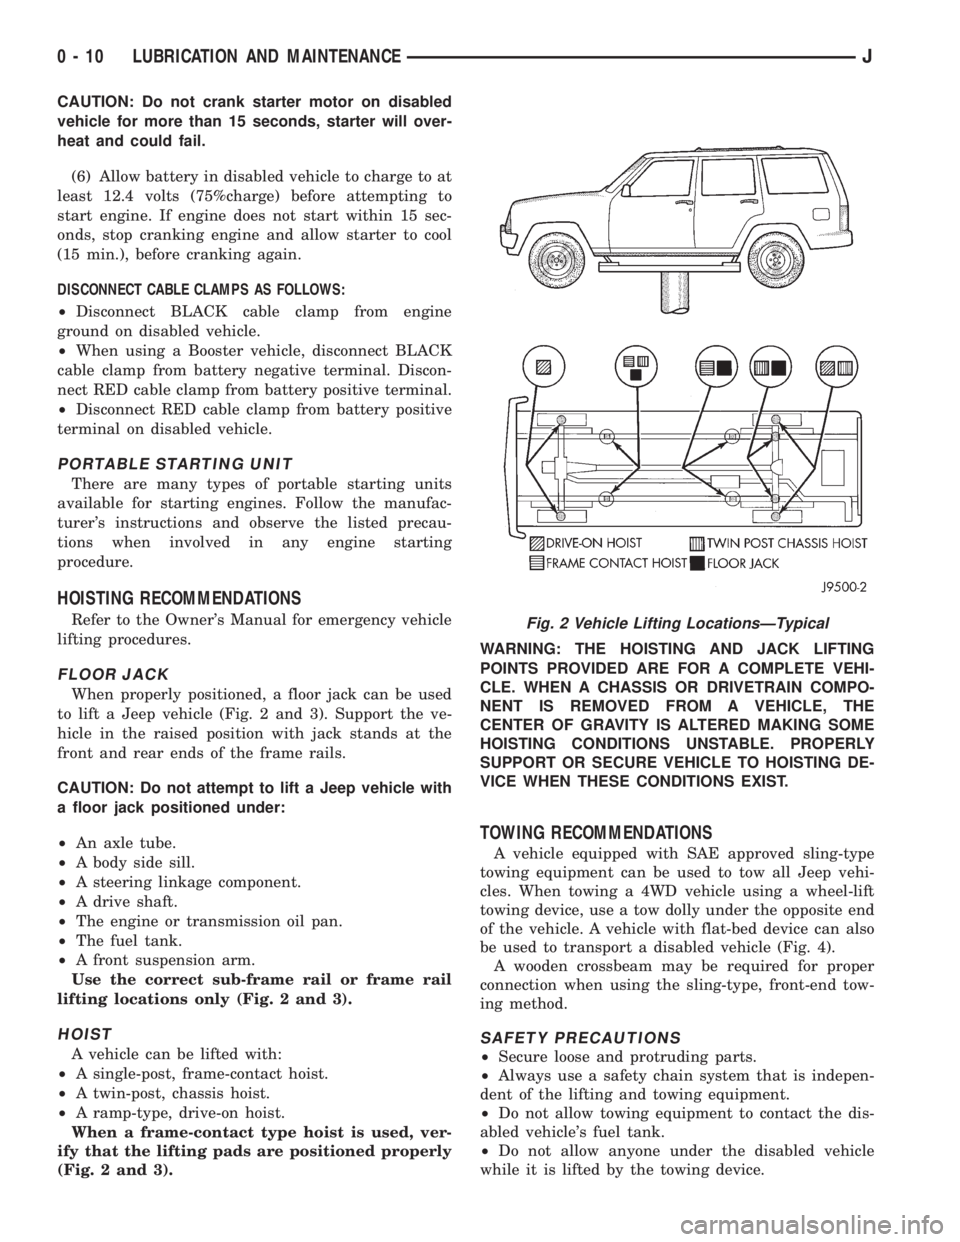 JEEP CHEROKEE 1995  Service Repair Manual CAUTION: Do not crank starter motor on disabled
vehicle for more than 15 seconds, starter will over-
heat and could fail.
(6) Allow battery in disabled vehicle to charge to at
least 12.4 volts (75%cha